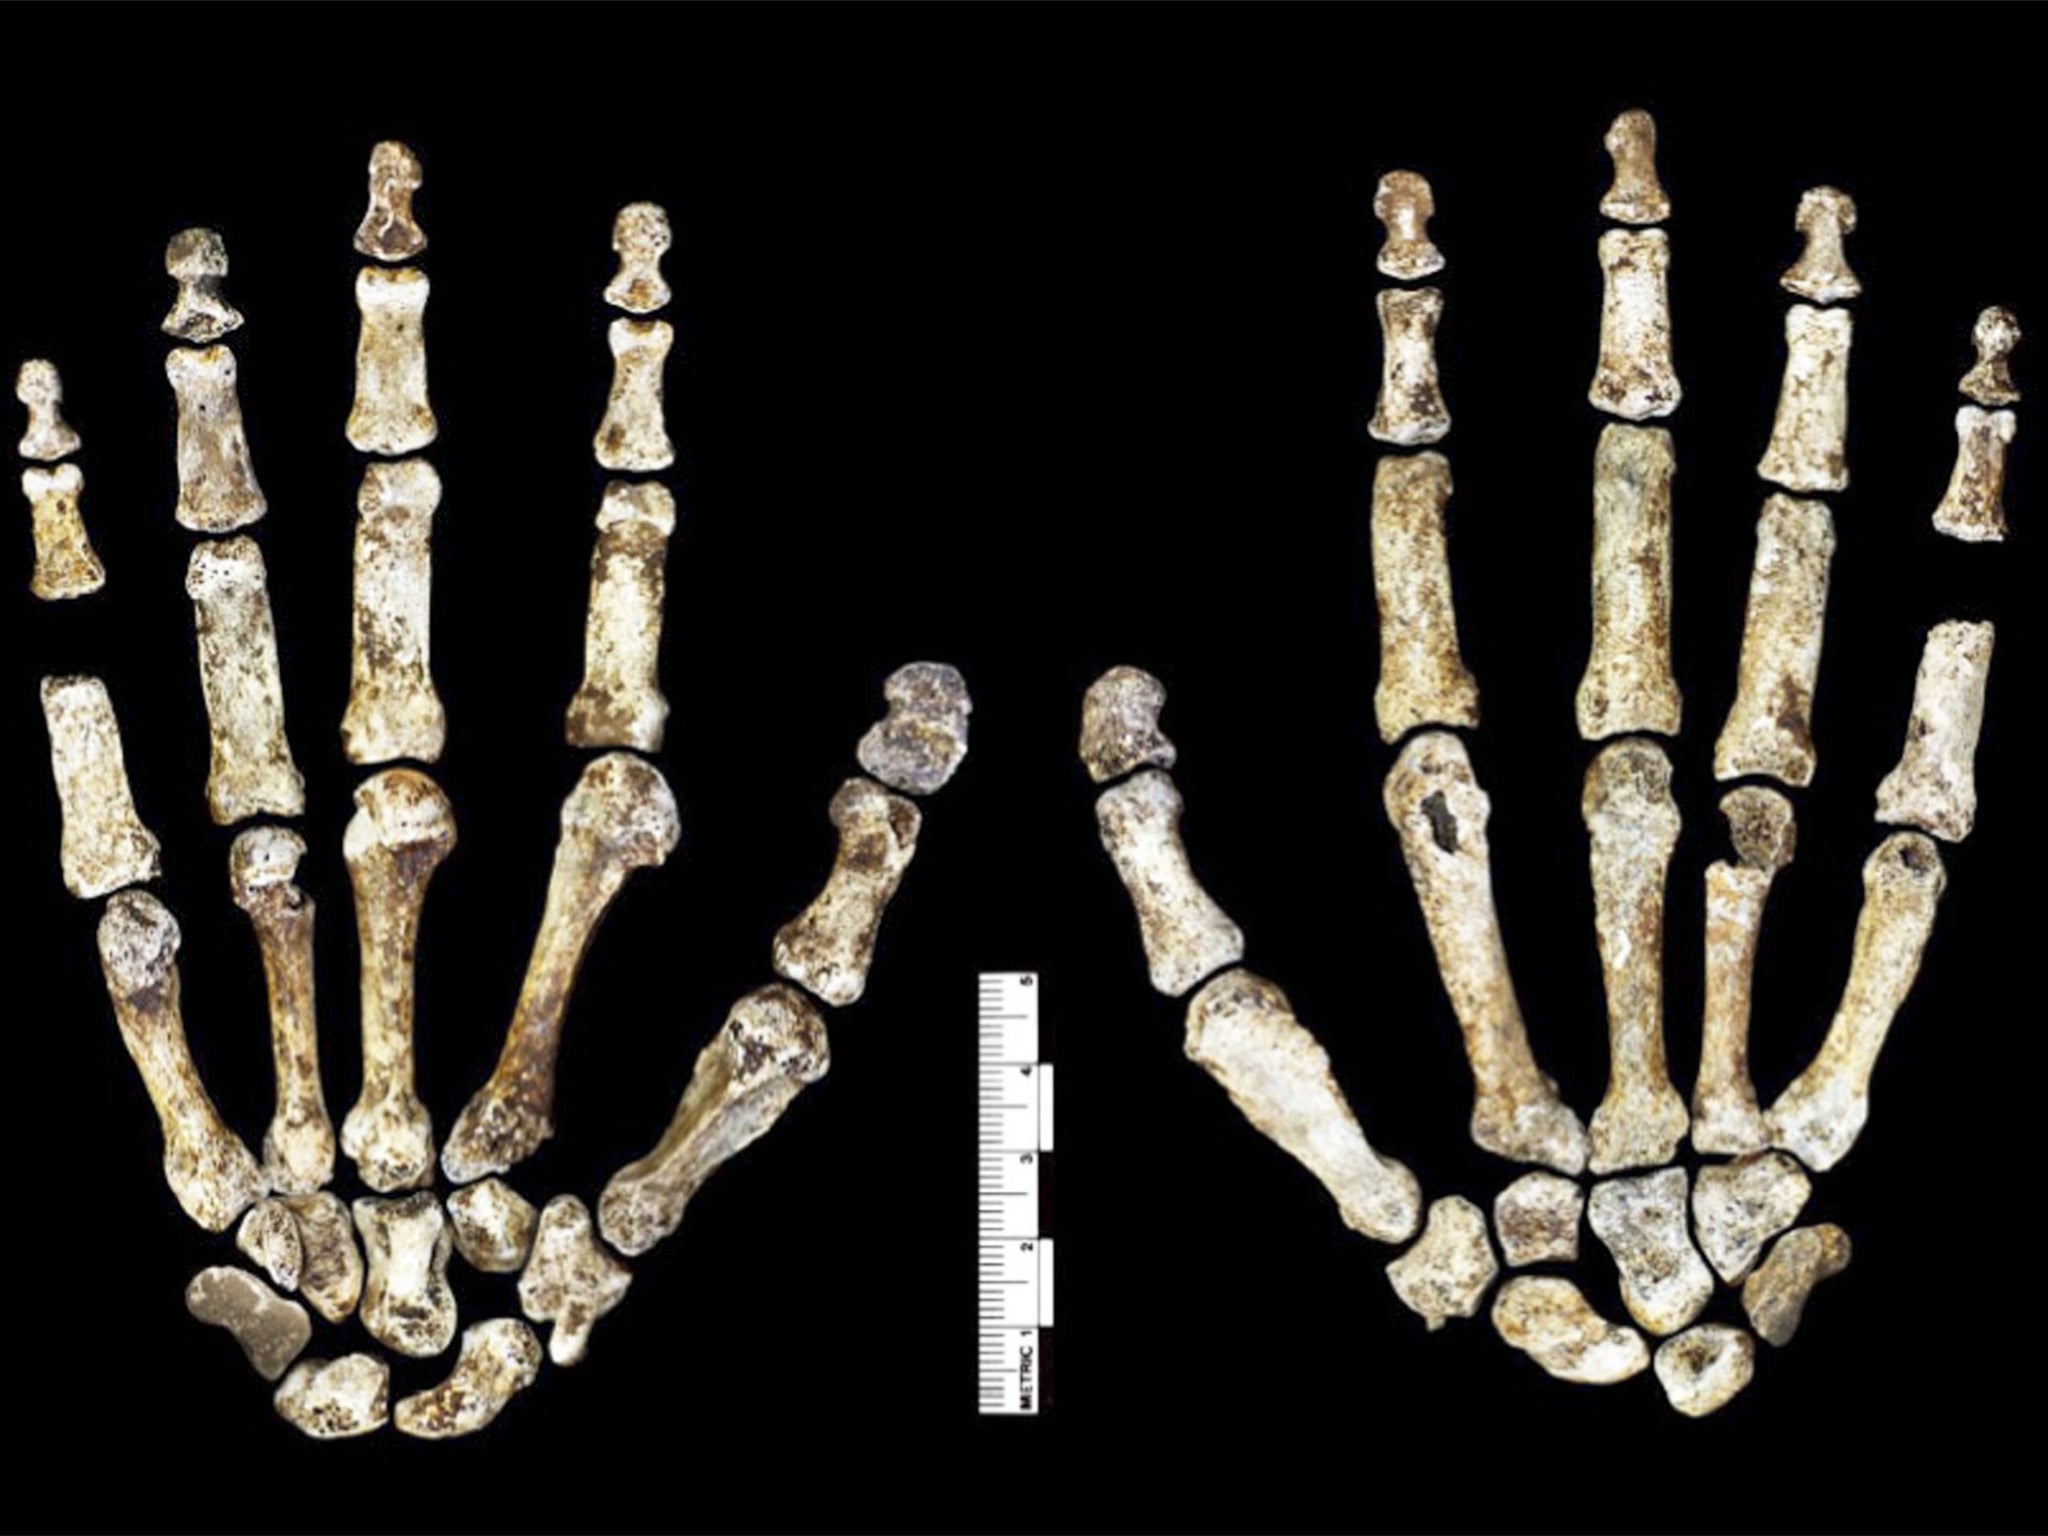 Homo naledi hand in palmar view, left, and dorsal view